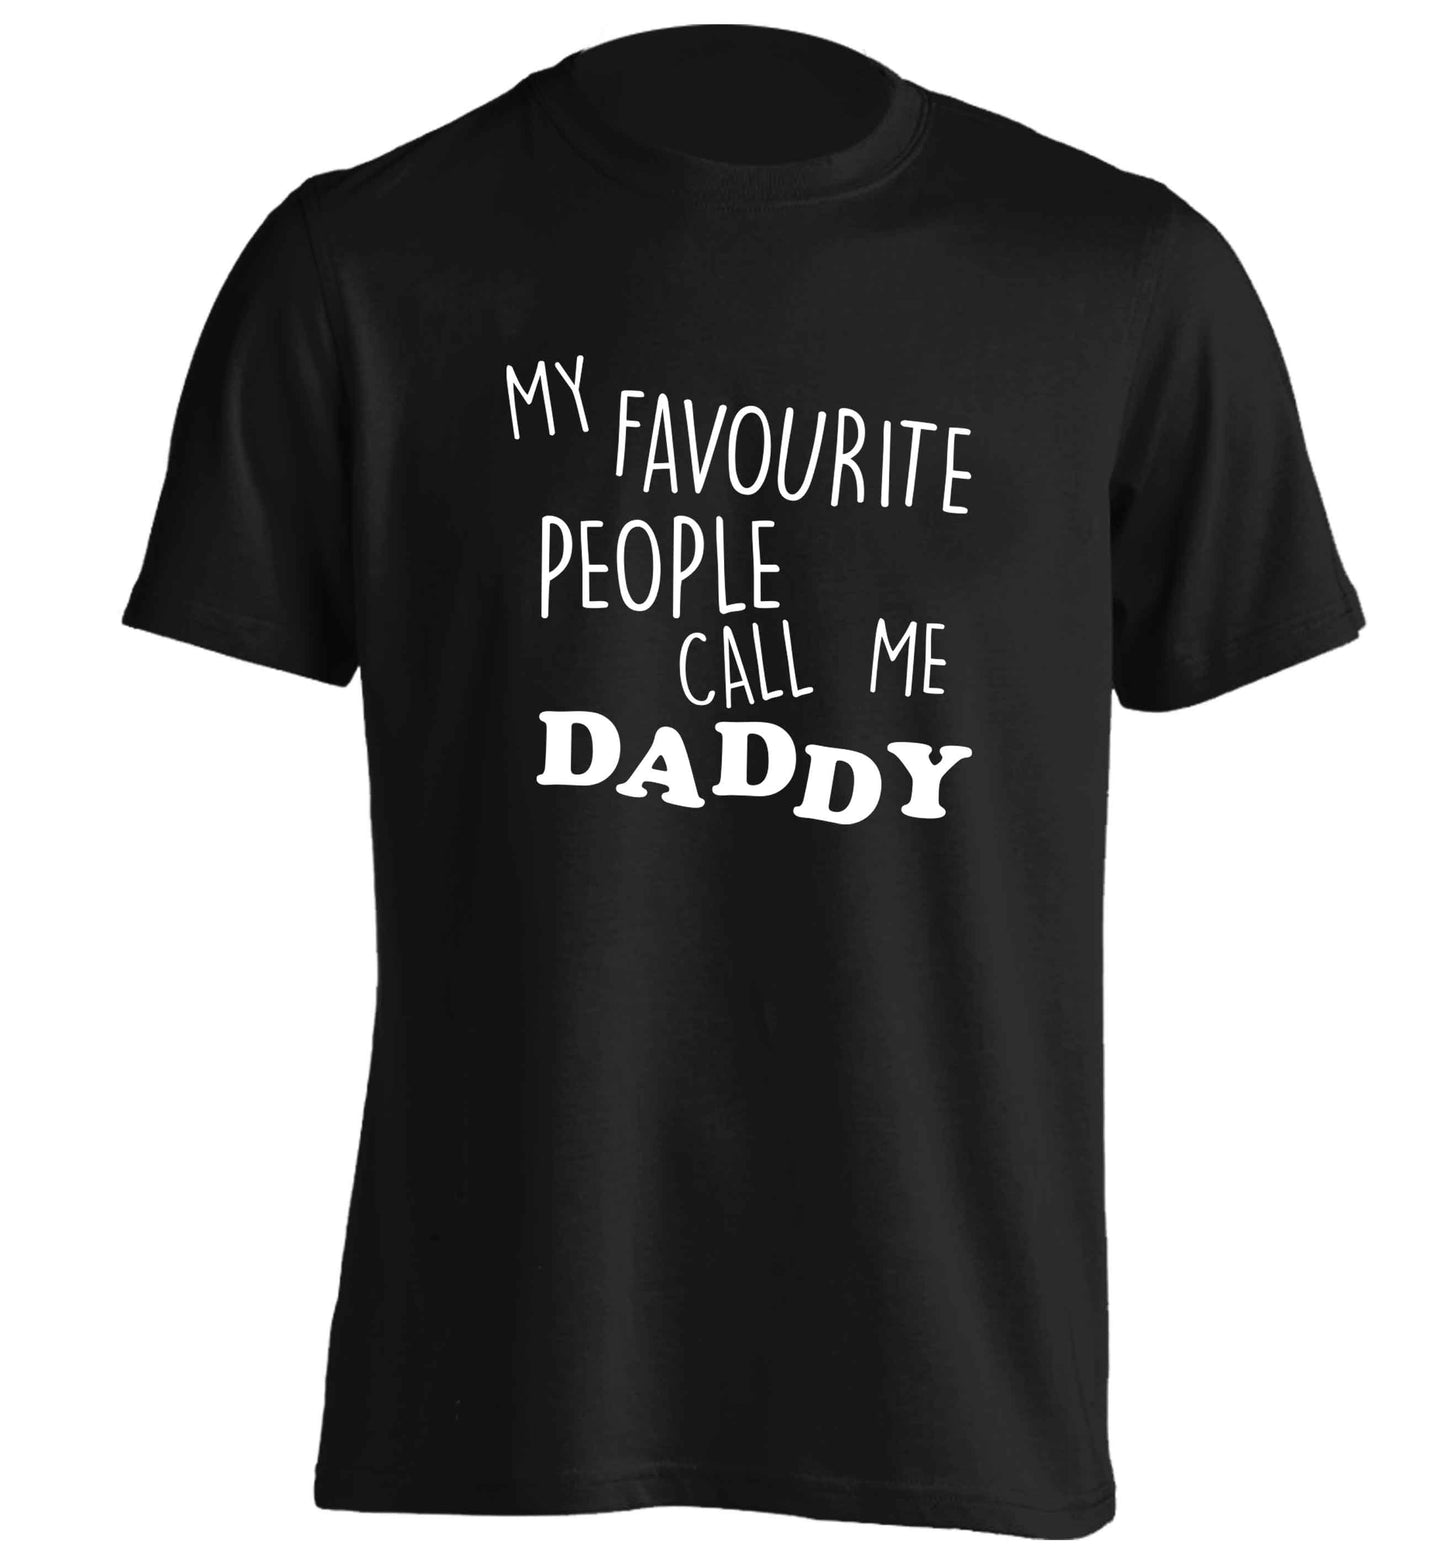 My favourite people call me daddy adults unisex black Tshirt 2XL